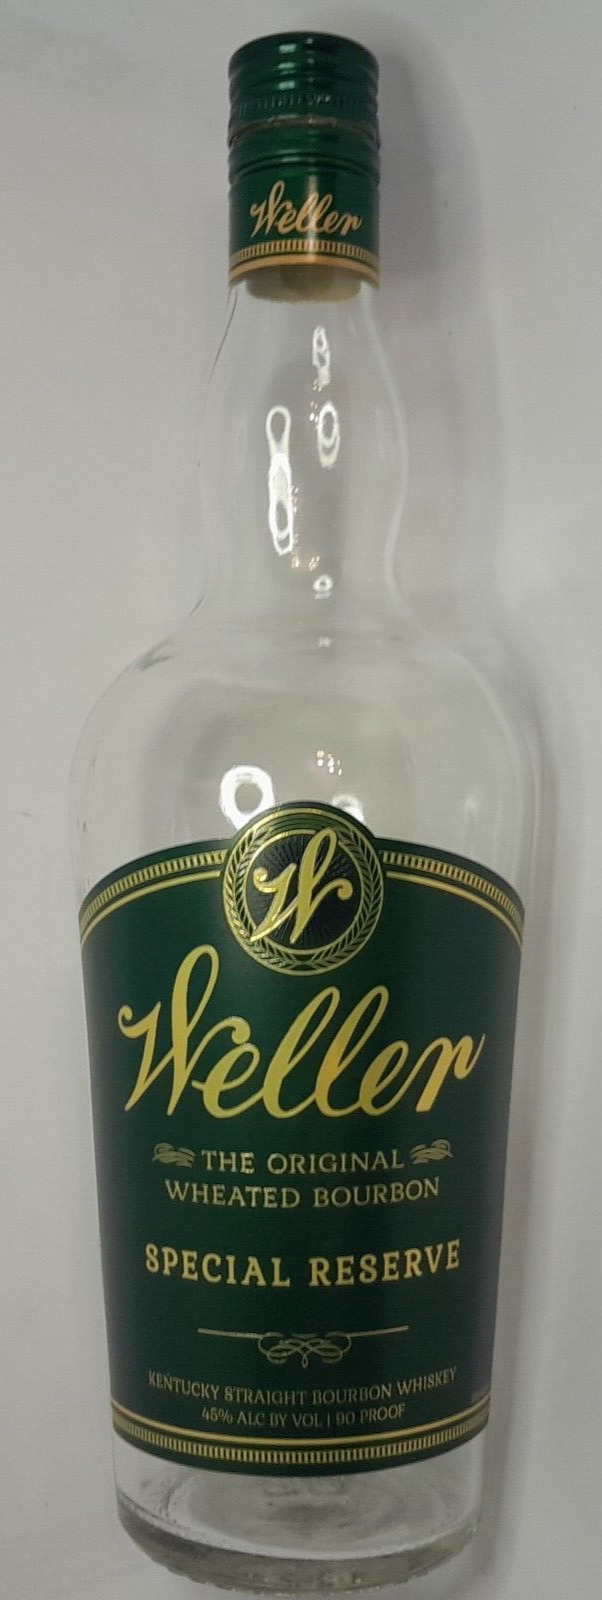 Weller Bourbon Bottle EMPTY Special Reserve Green Label 750mL with Cap USED